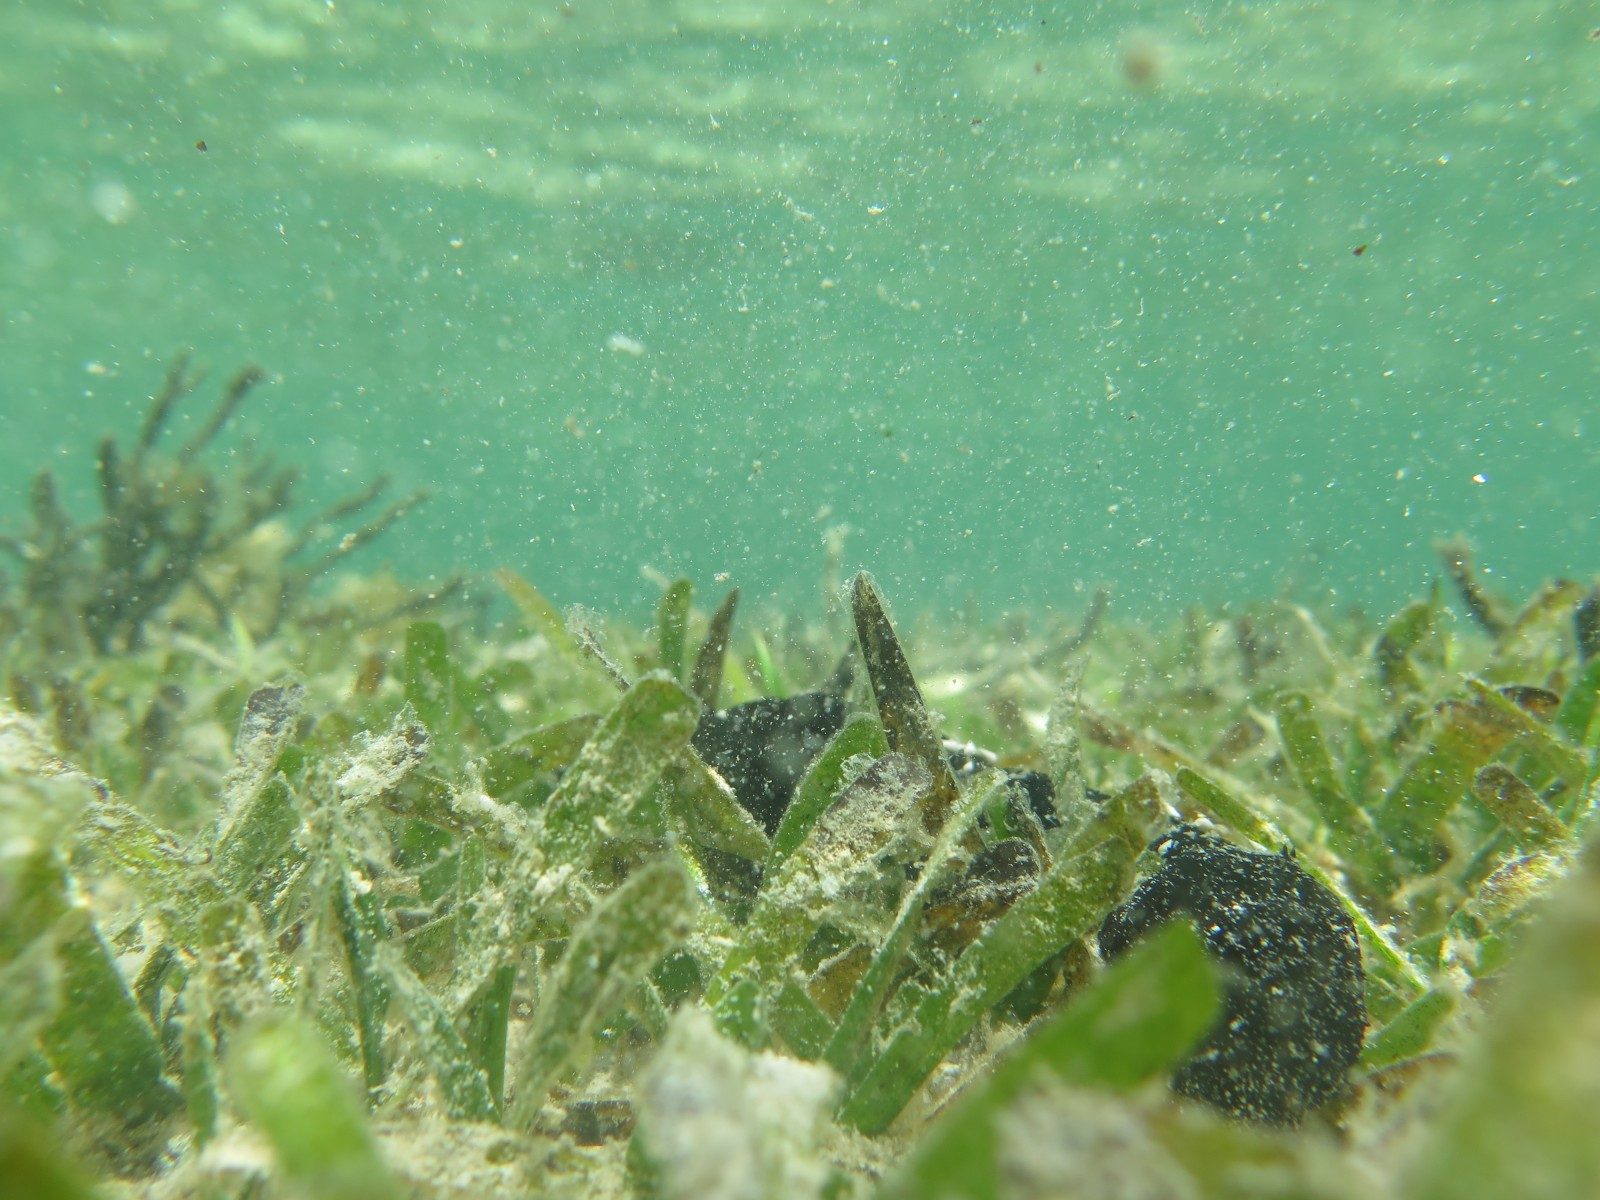 Another (surprising) brick in the wall:  how seagrass protects coastlines against erosion.